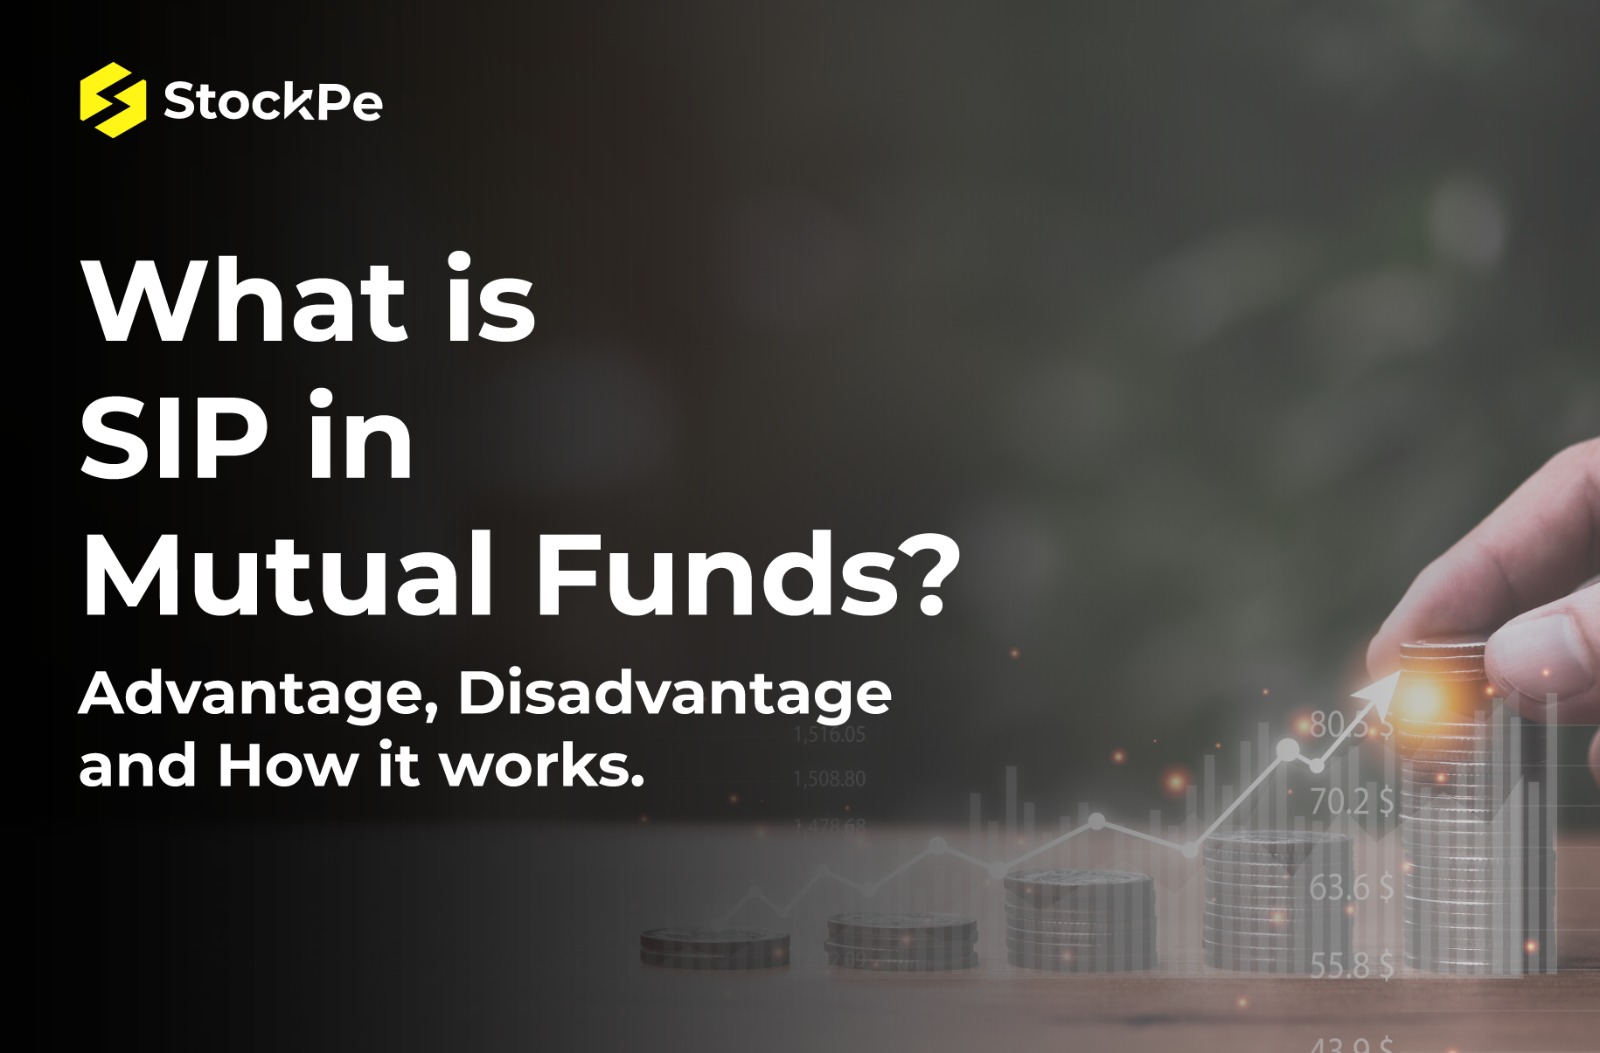 You are currently viewing What is SIP in Mutual Funds? Advantage, Disadvantage and How it works.